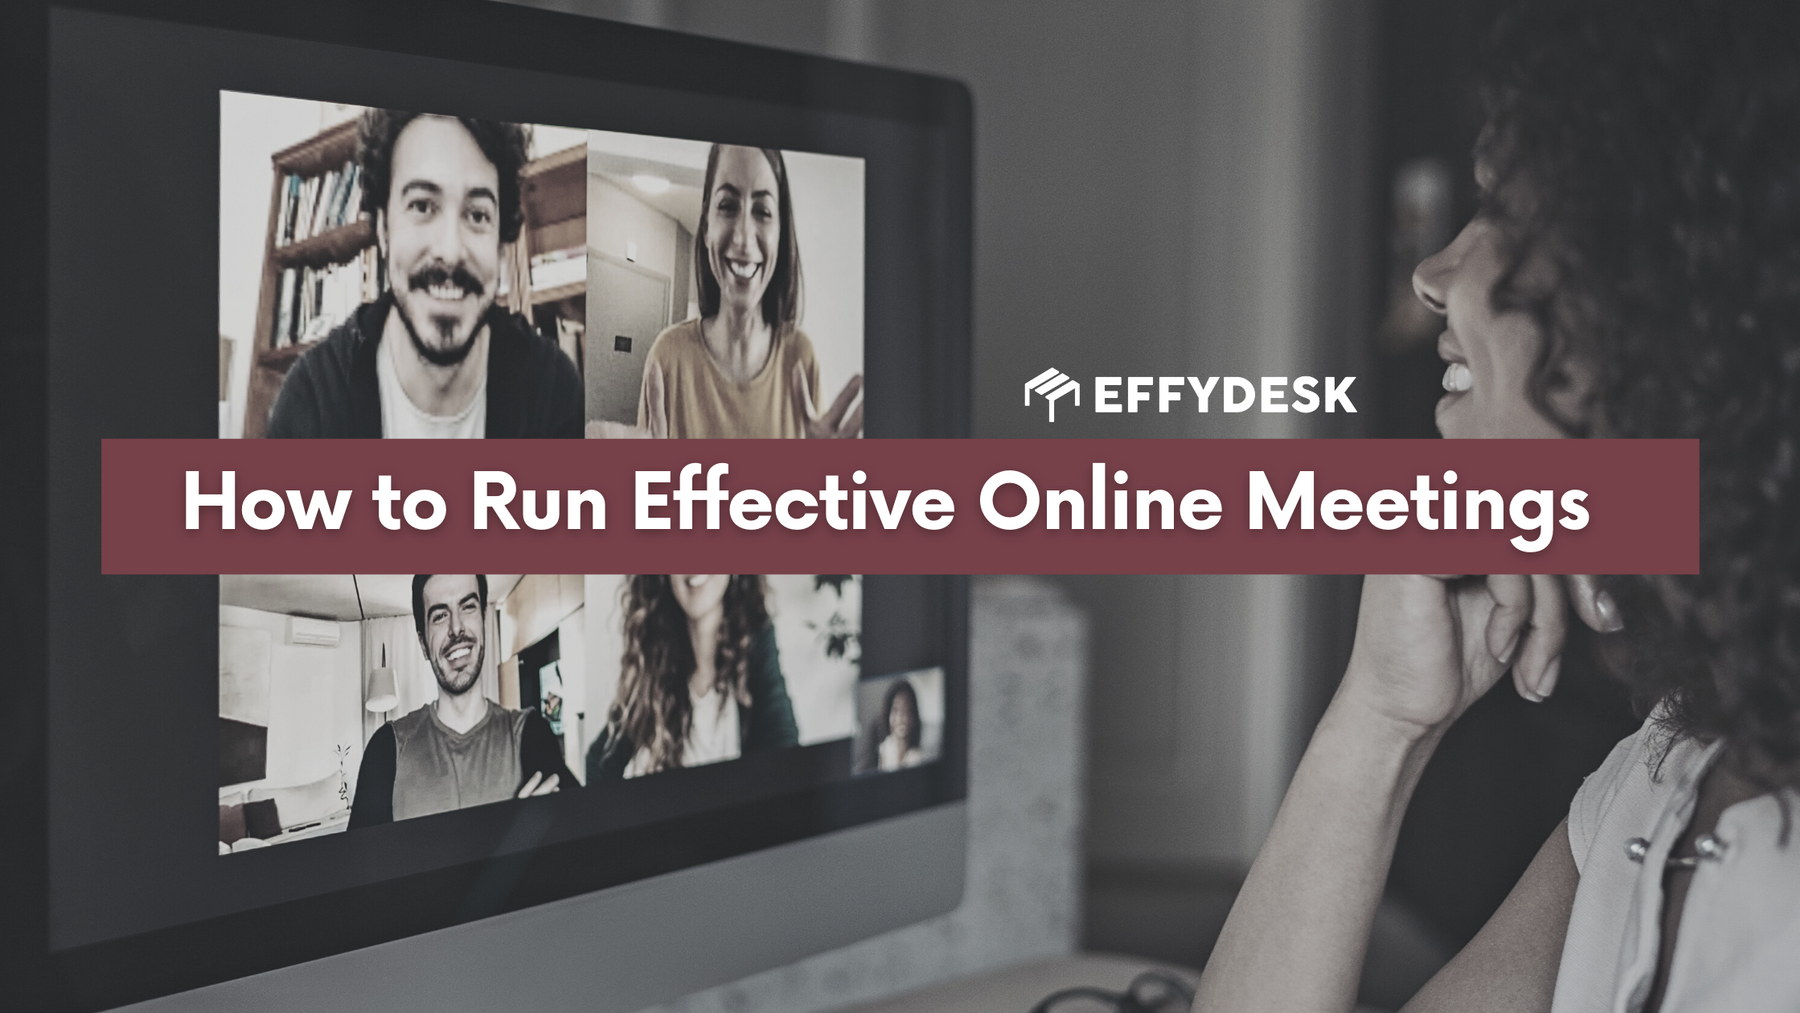 Learn how to run effective online meeting while you working from home